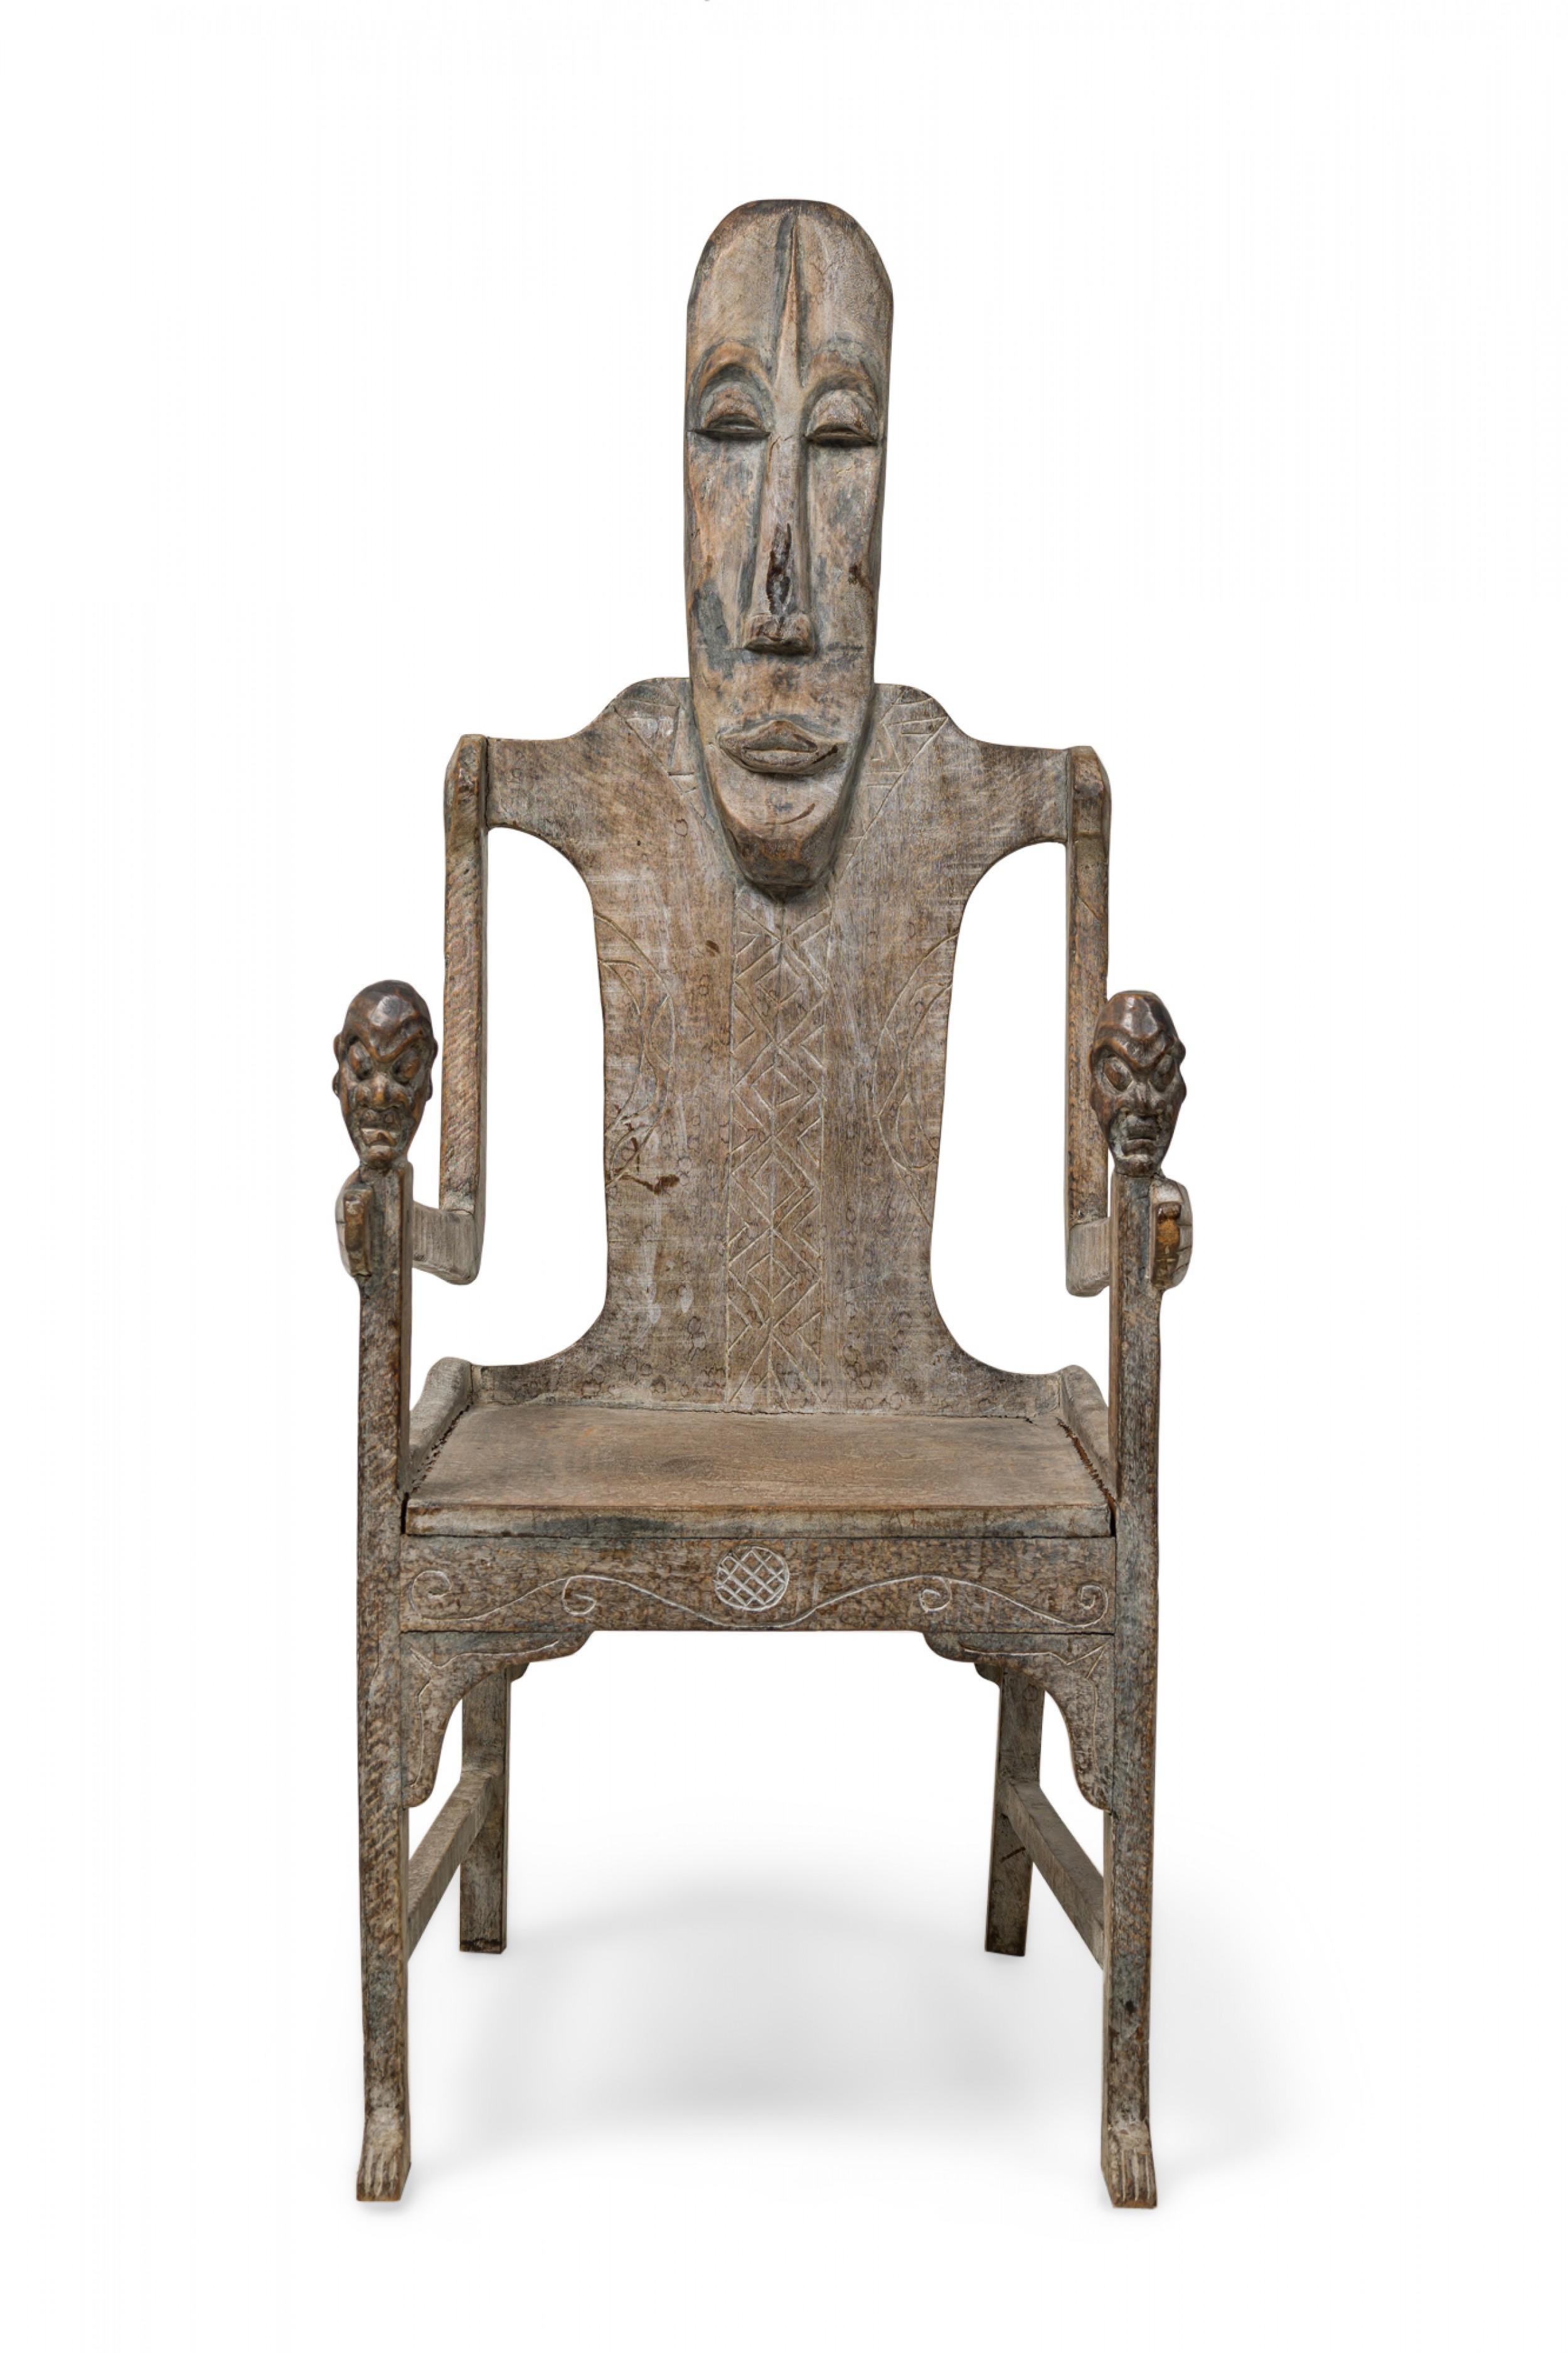 PAIR of Large African (Early 20th Century) rootwood armchairs with carved figural backs, both grasping mask staffs as front supports, with incised decorative patterns, ending in 2 carved front feet. (PRICED AS PAIR).